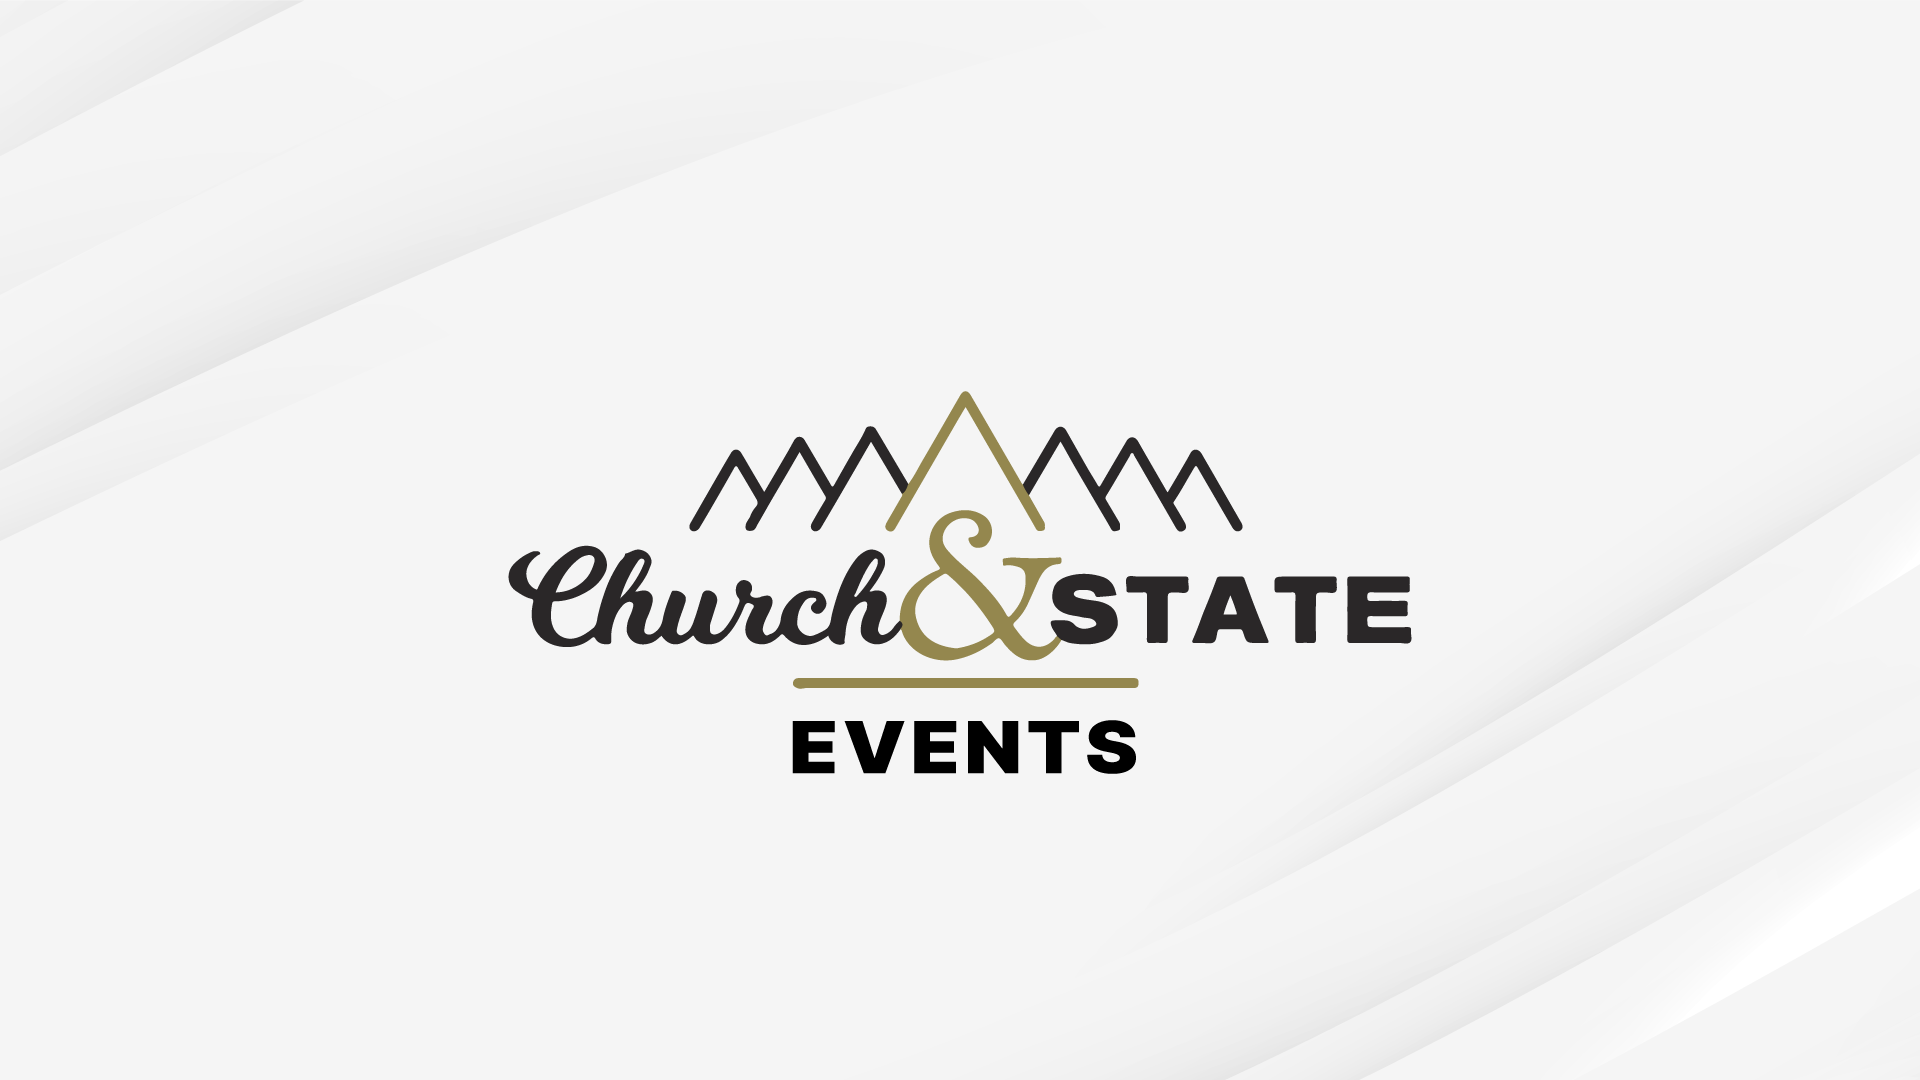 Church & State Events